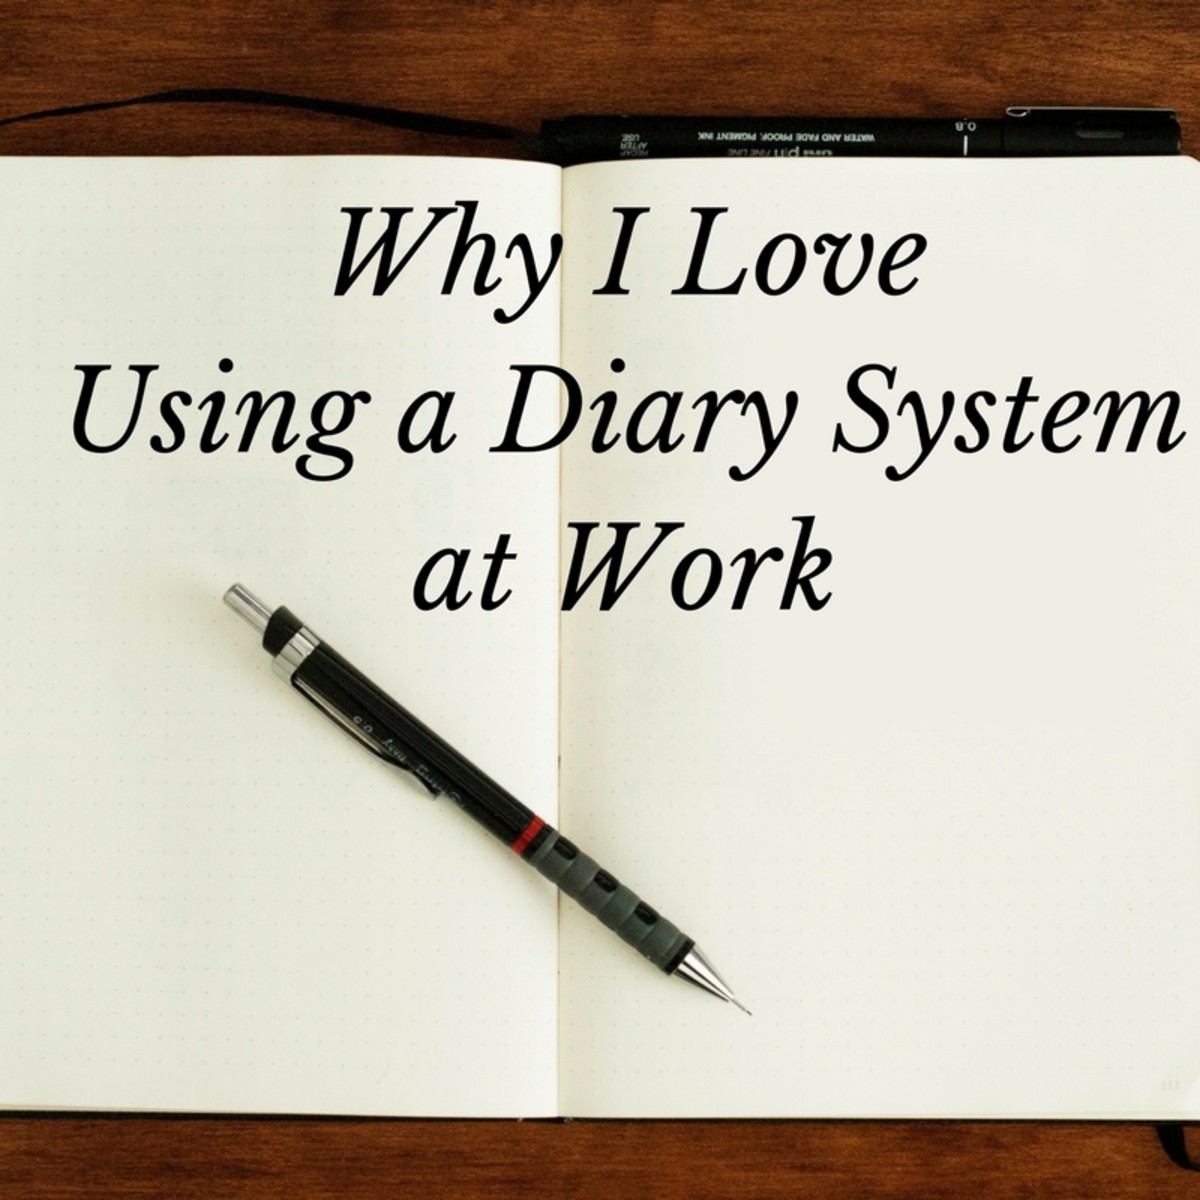 My diary system keeps me organized and ahead of the schedule, and it could help you, too.